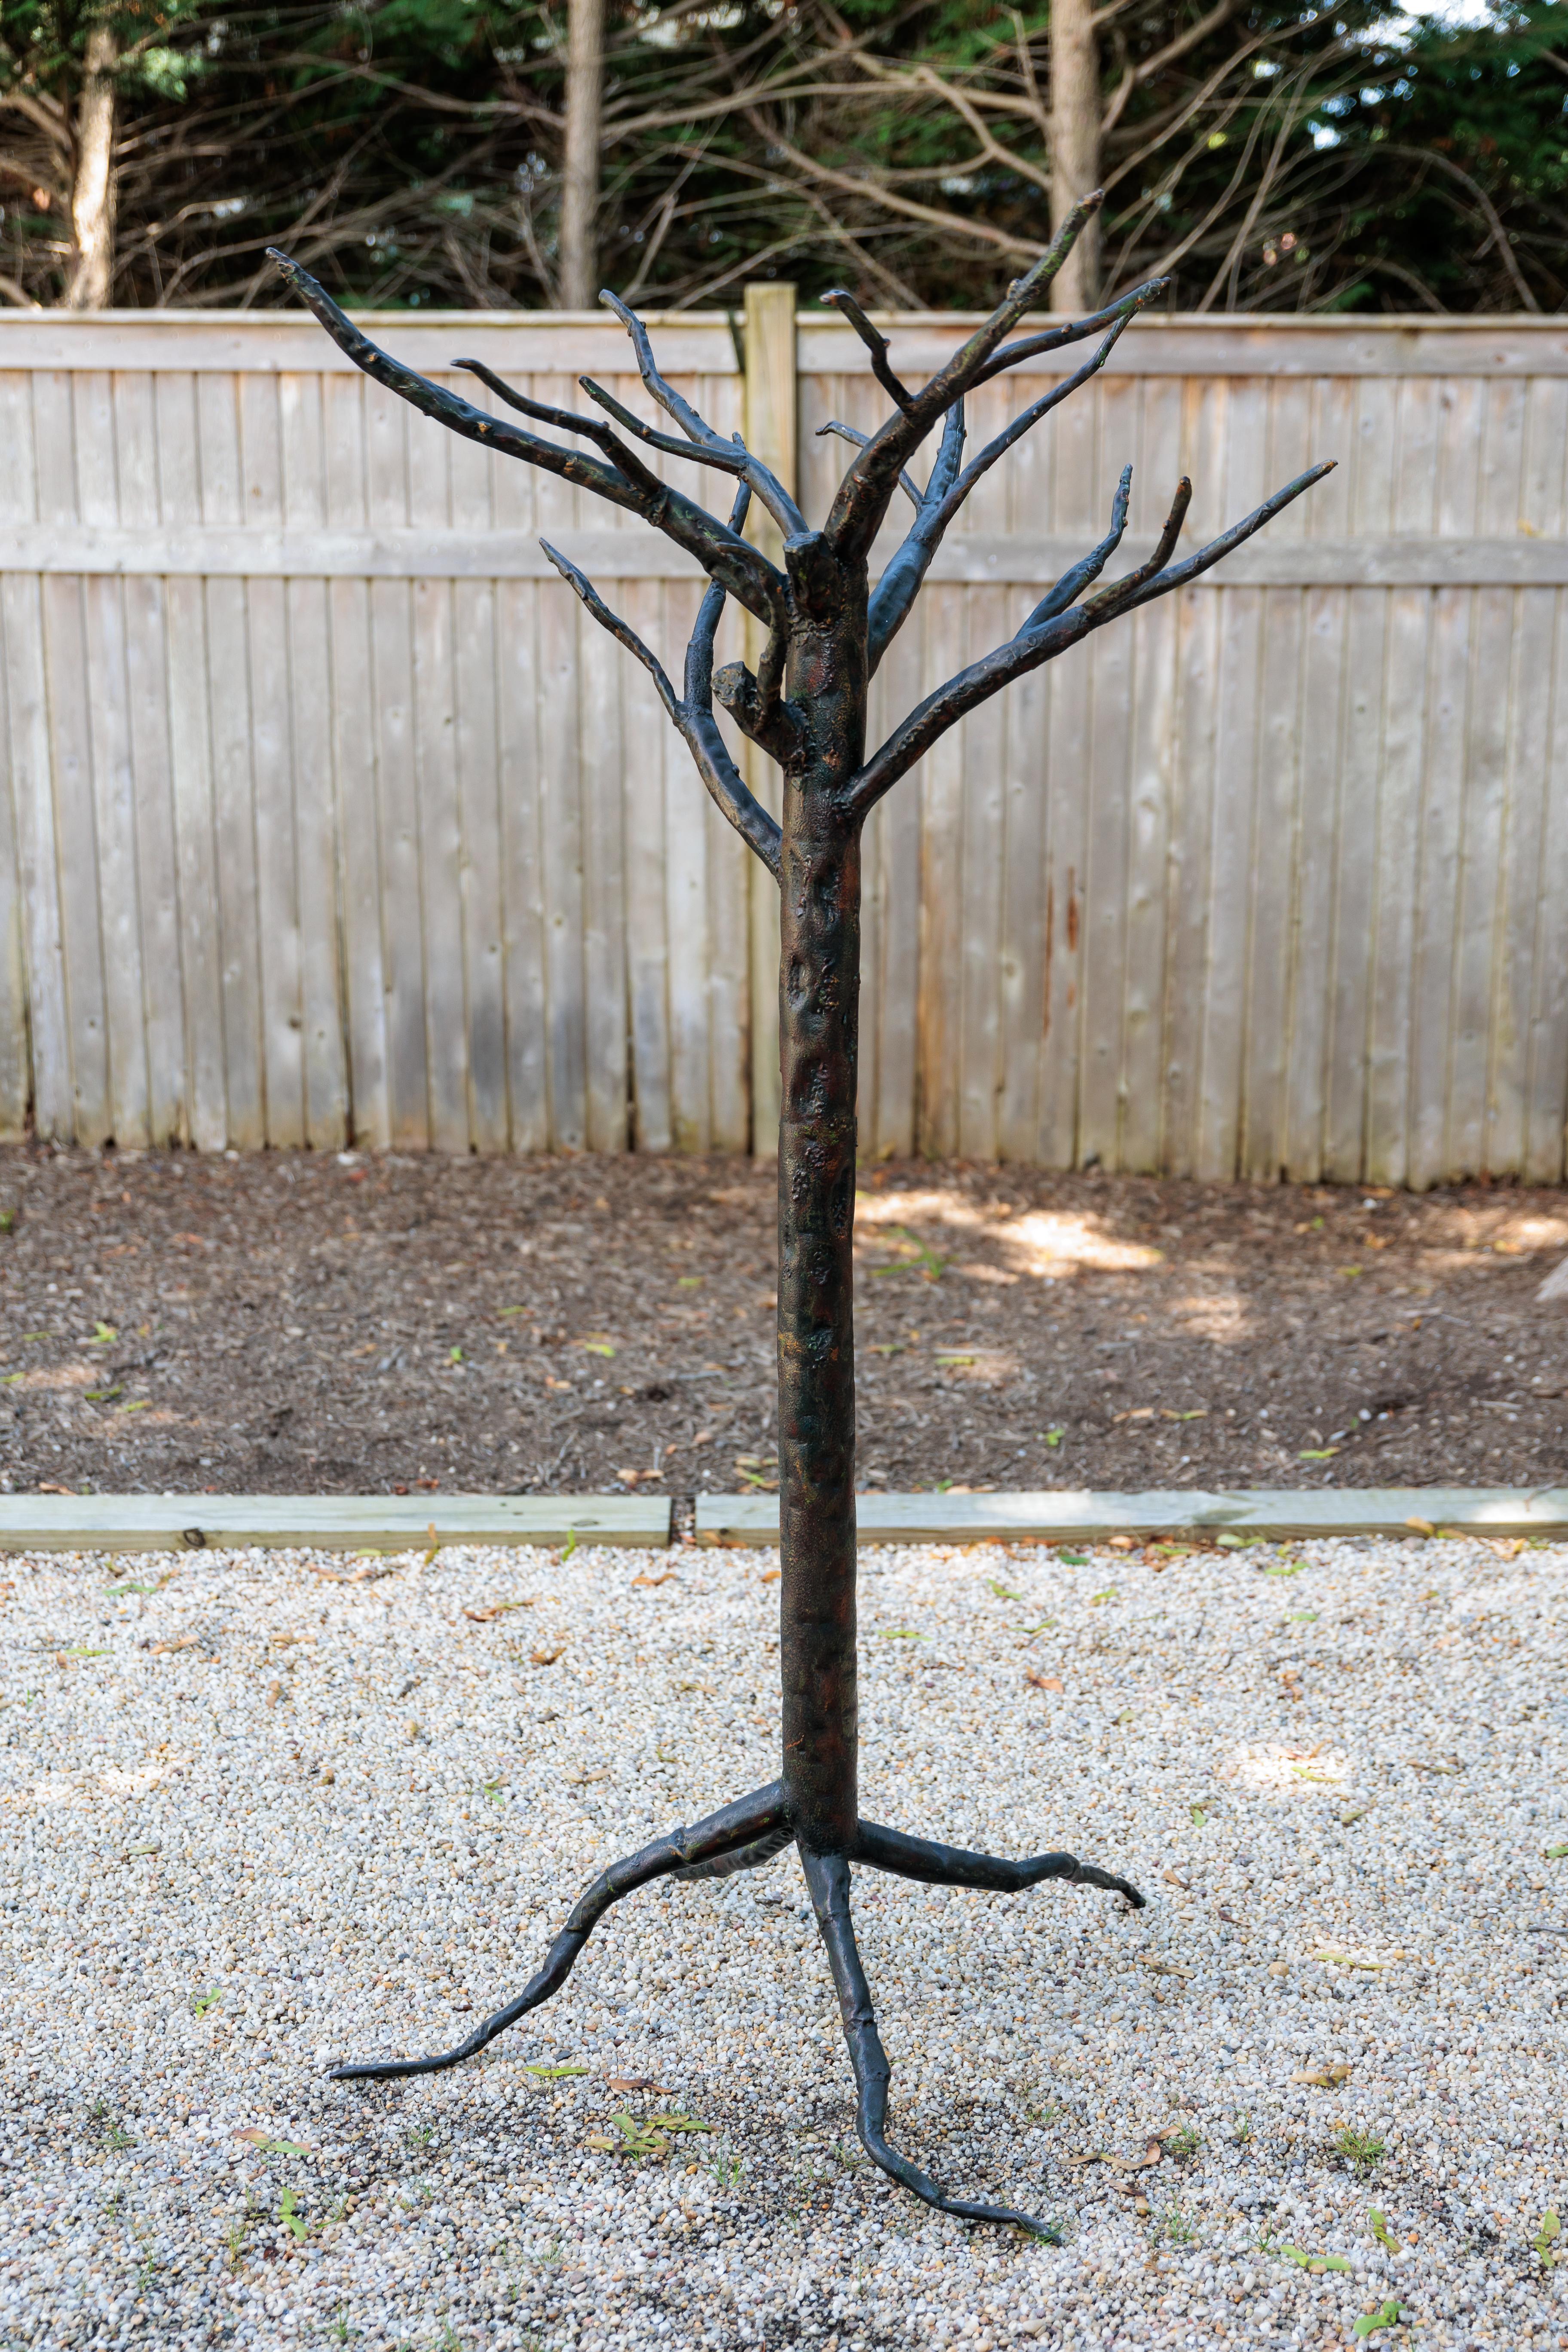 This tree can of course be used as a decorative piece.
Also used as a clothing/hat rack, etc.